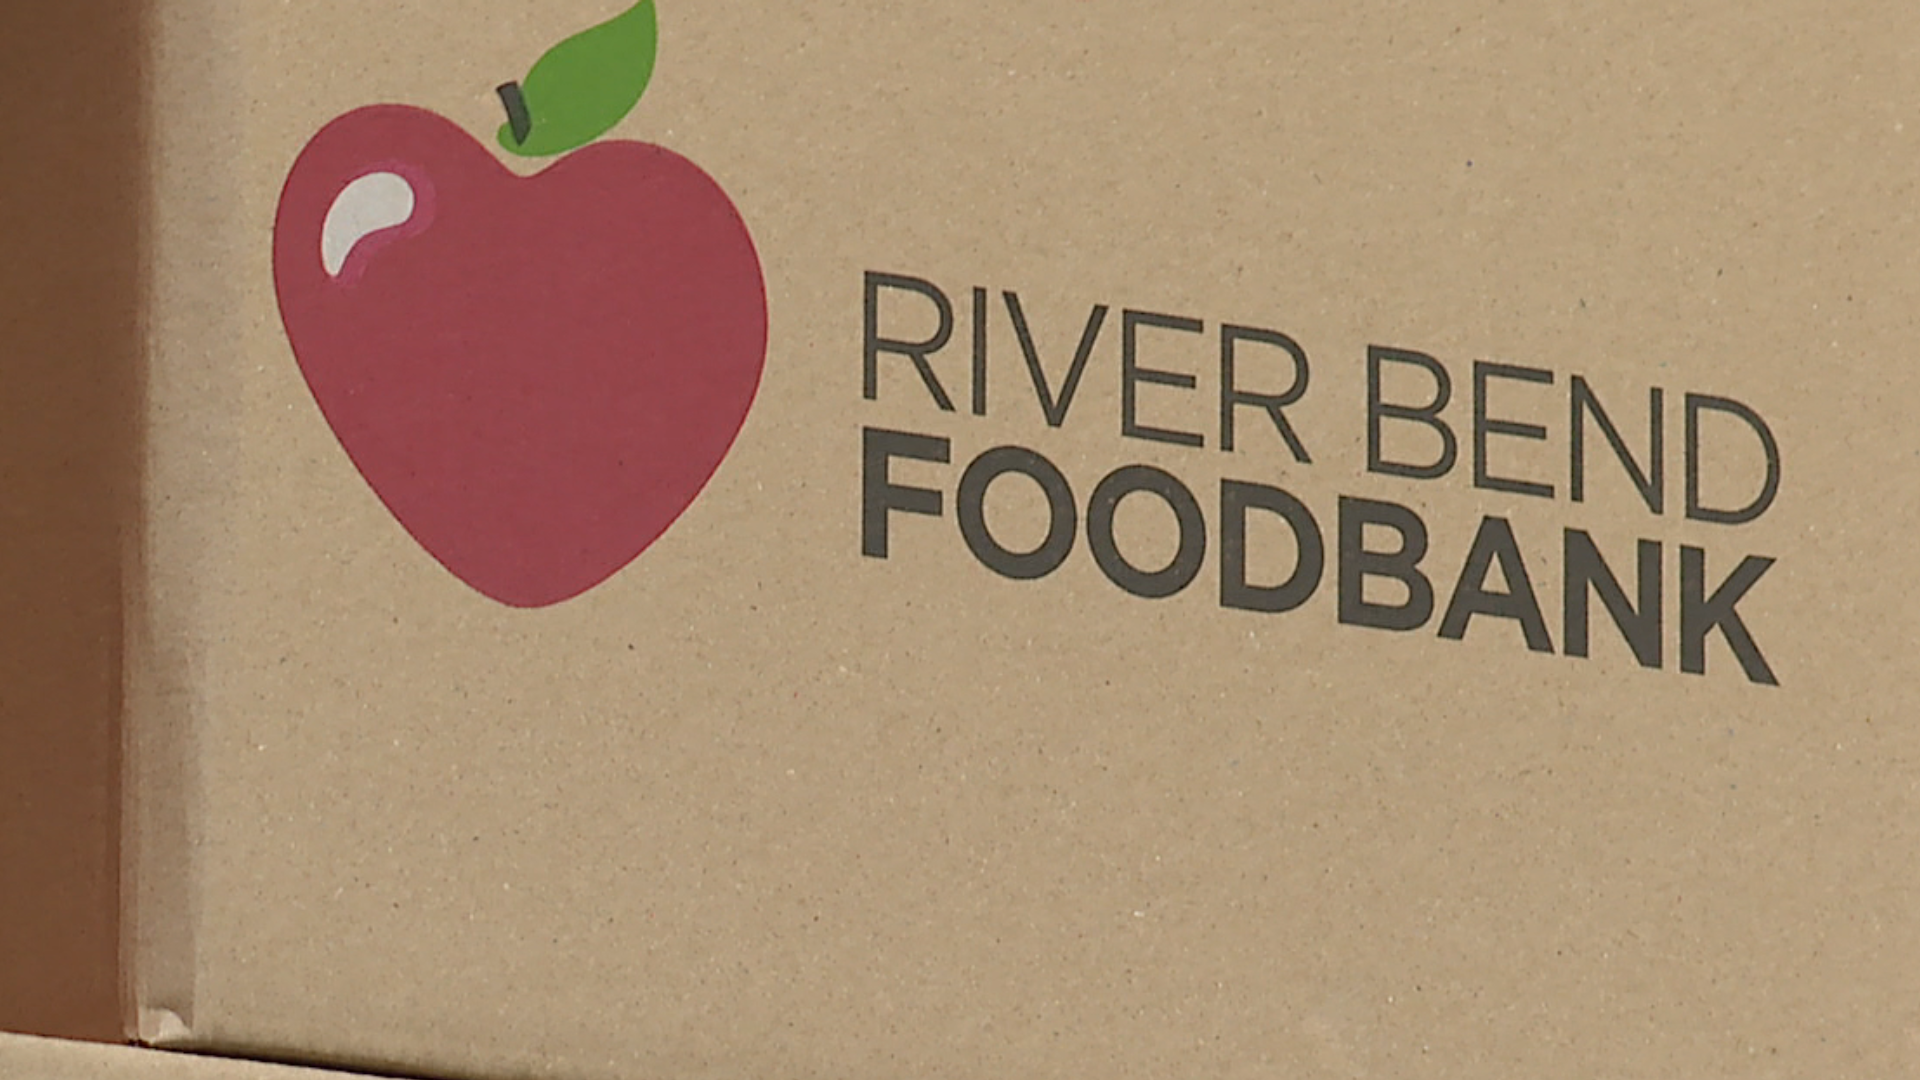 The donation will be available to all of the River Bend Food Bank's partner panties to feed families across the region.